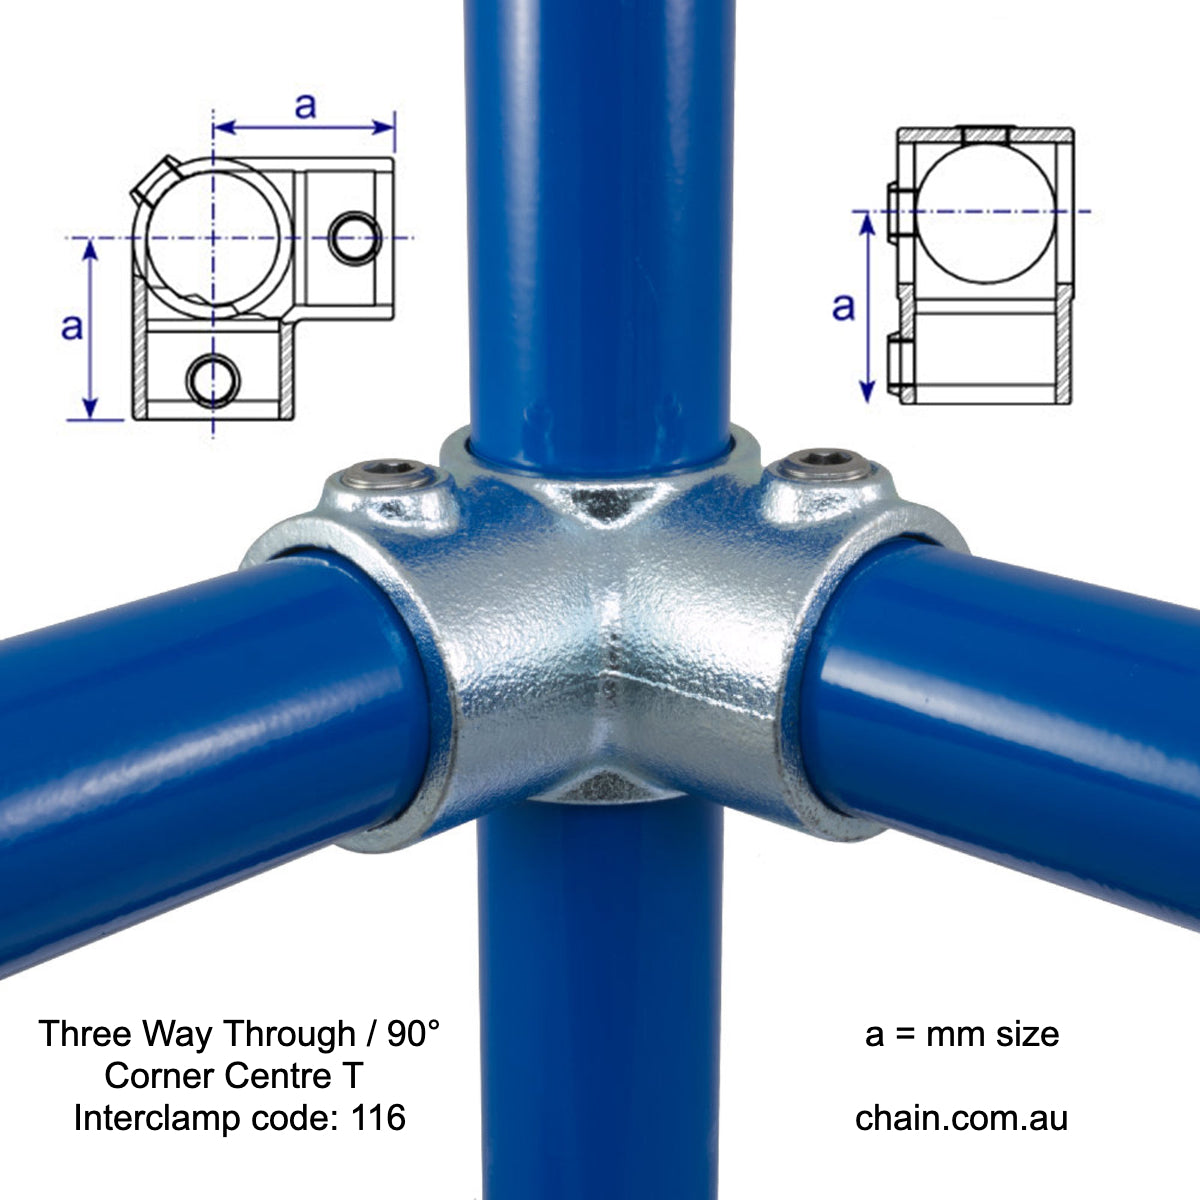 Three Way Through or 90 Degree Corner Centre T by Interclamp Code 116. Shop rail, pipe and fence fittings online at chain.com.au. Australia wide shipping.